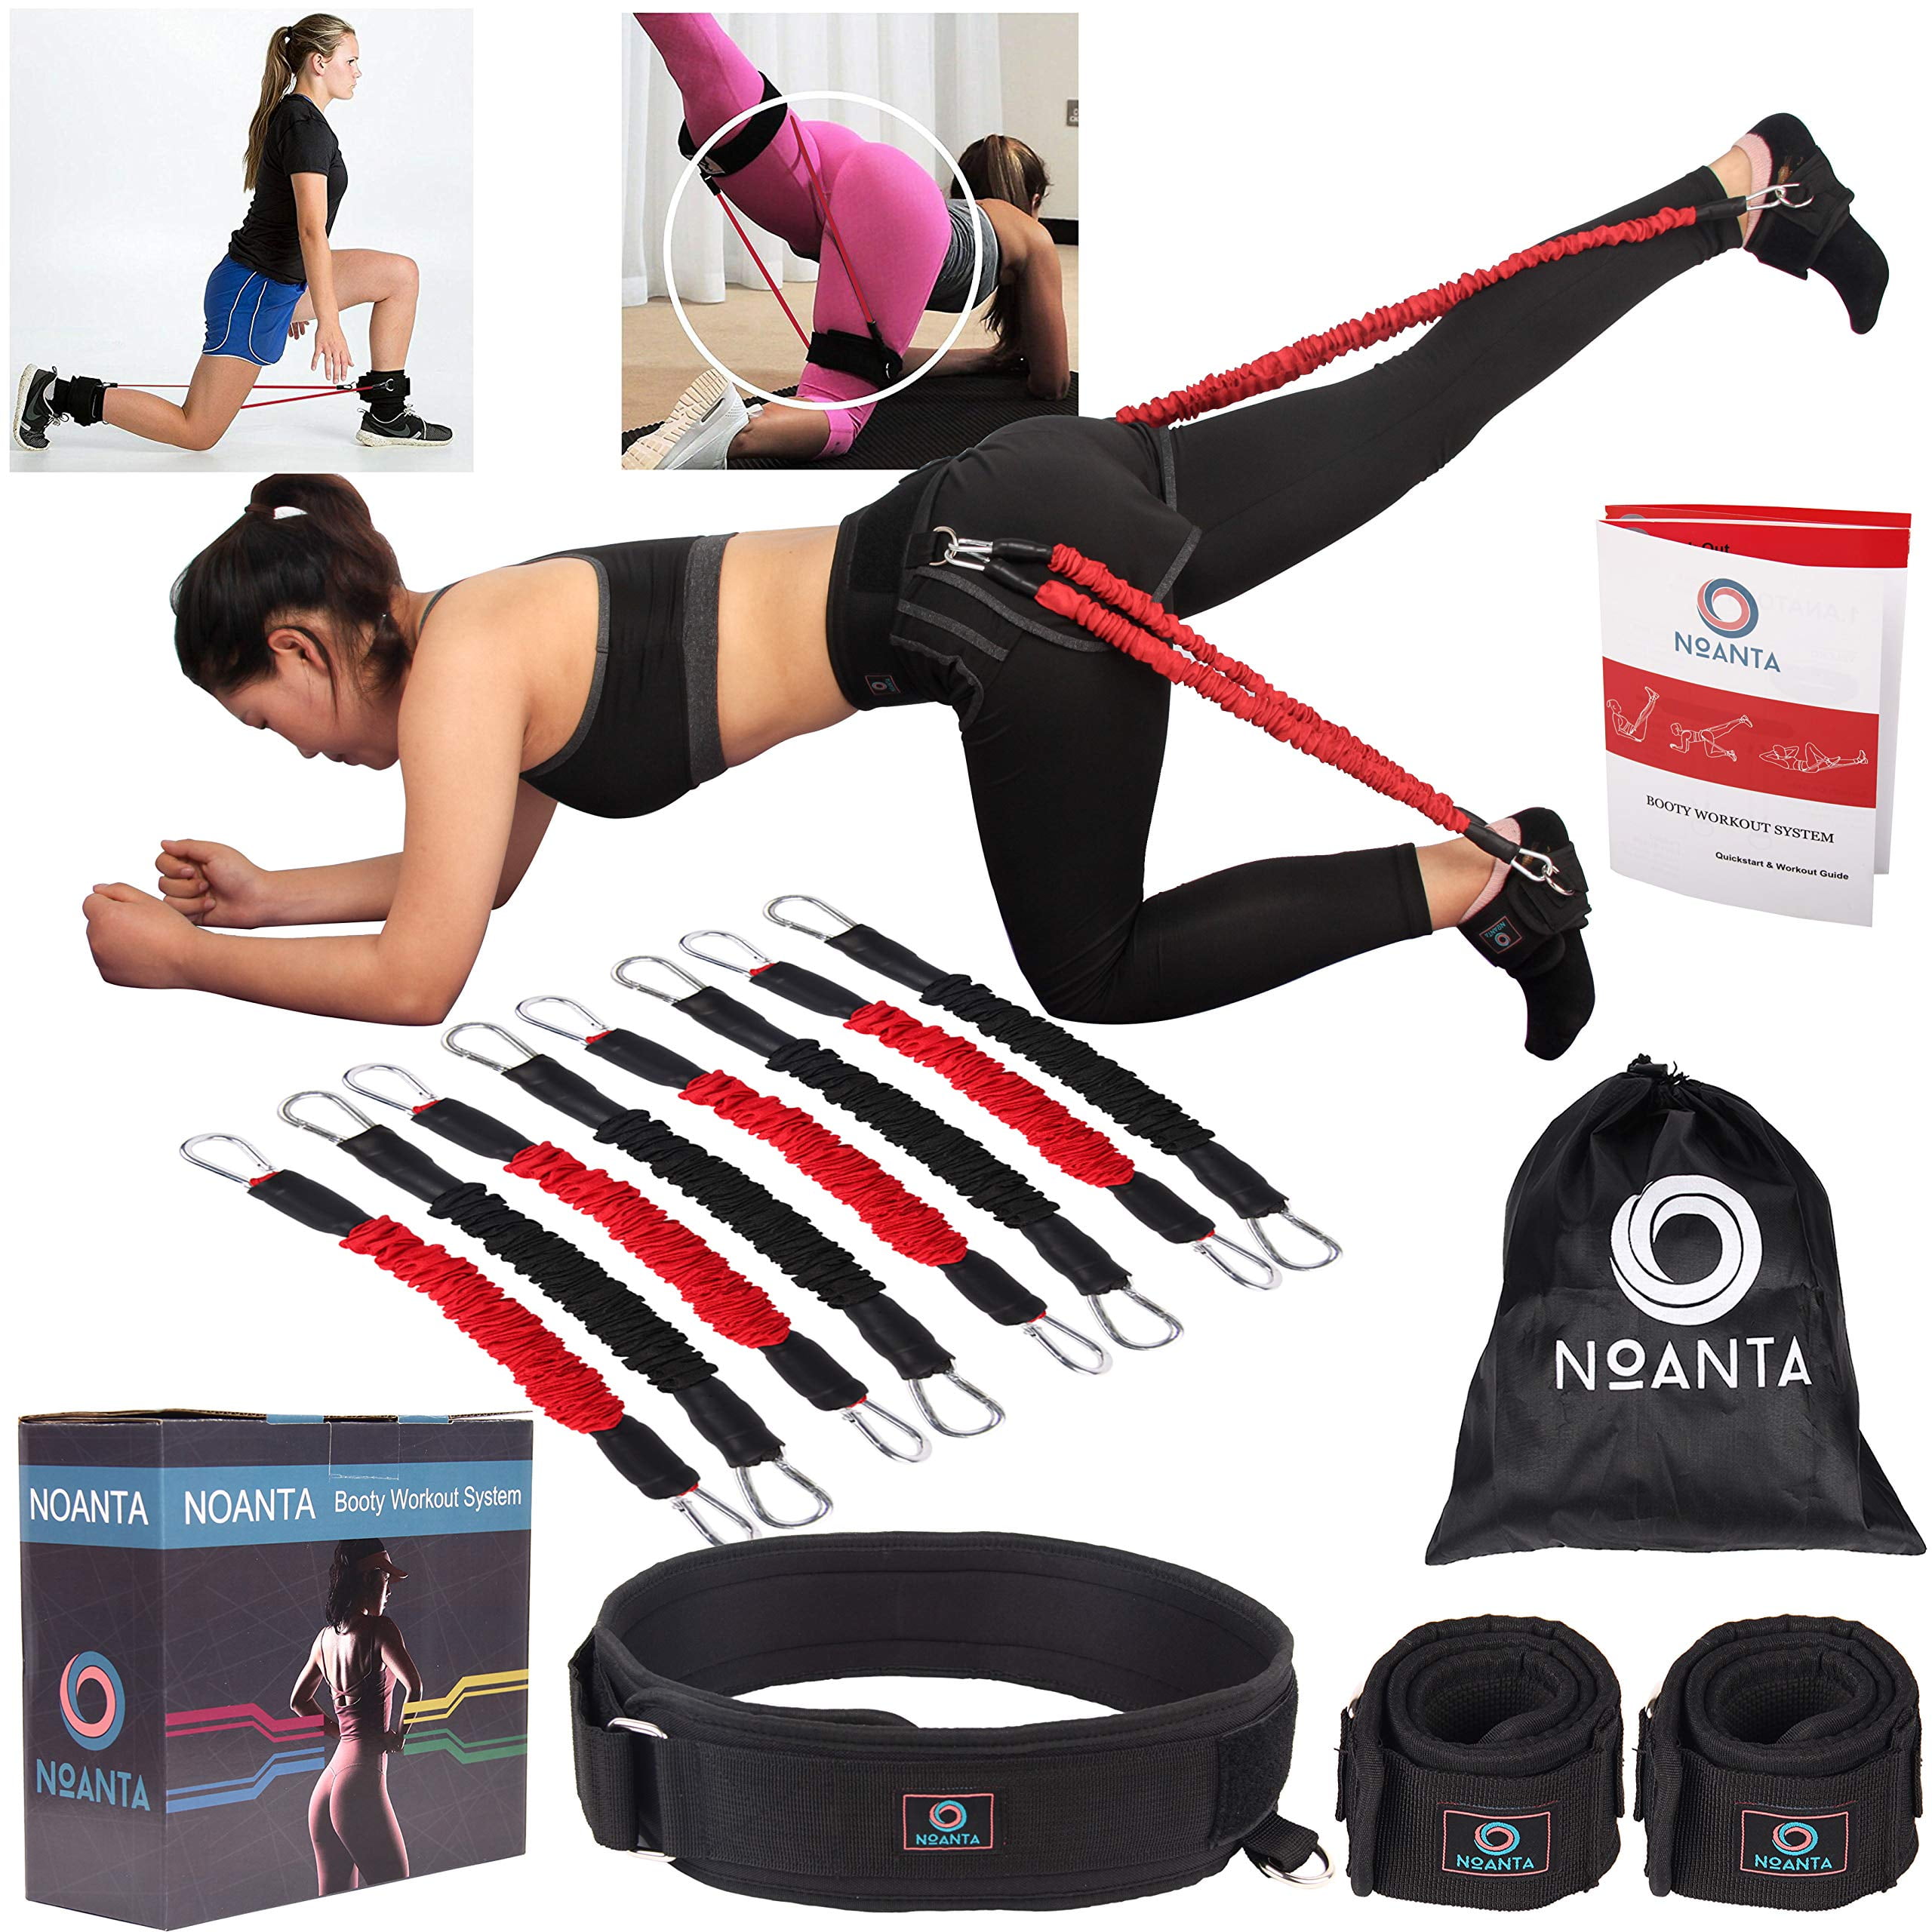 Workouty Speed & Agility Training Set with Waist Belt/Ankle Cuff/Resistance Band for Jumping Trainer Leg Strength Home Gym Equipment 